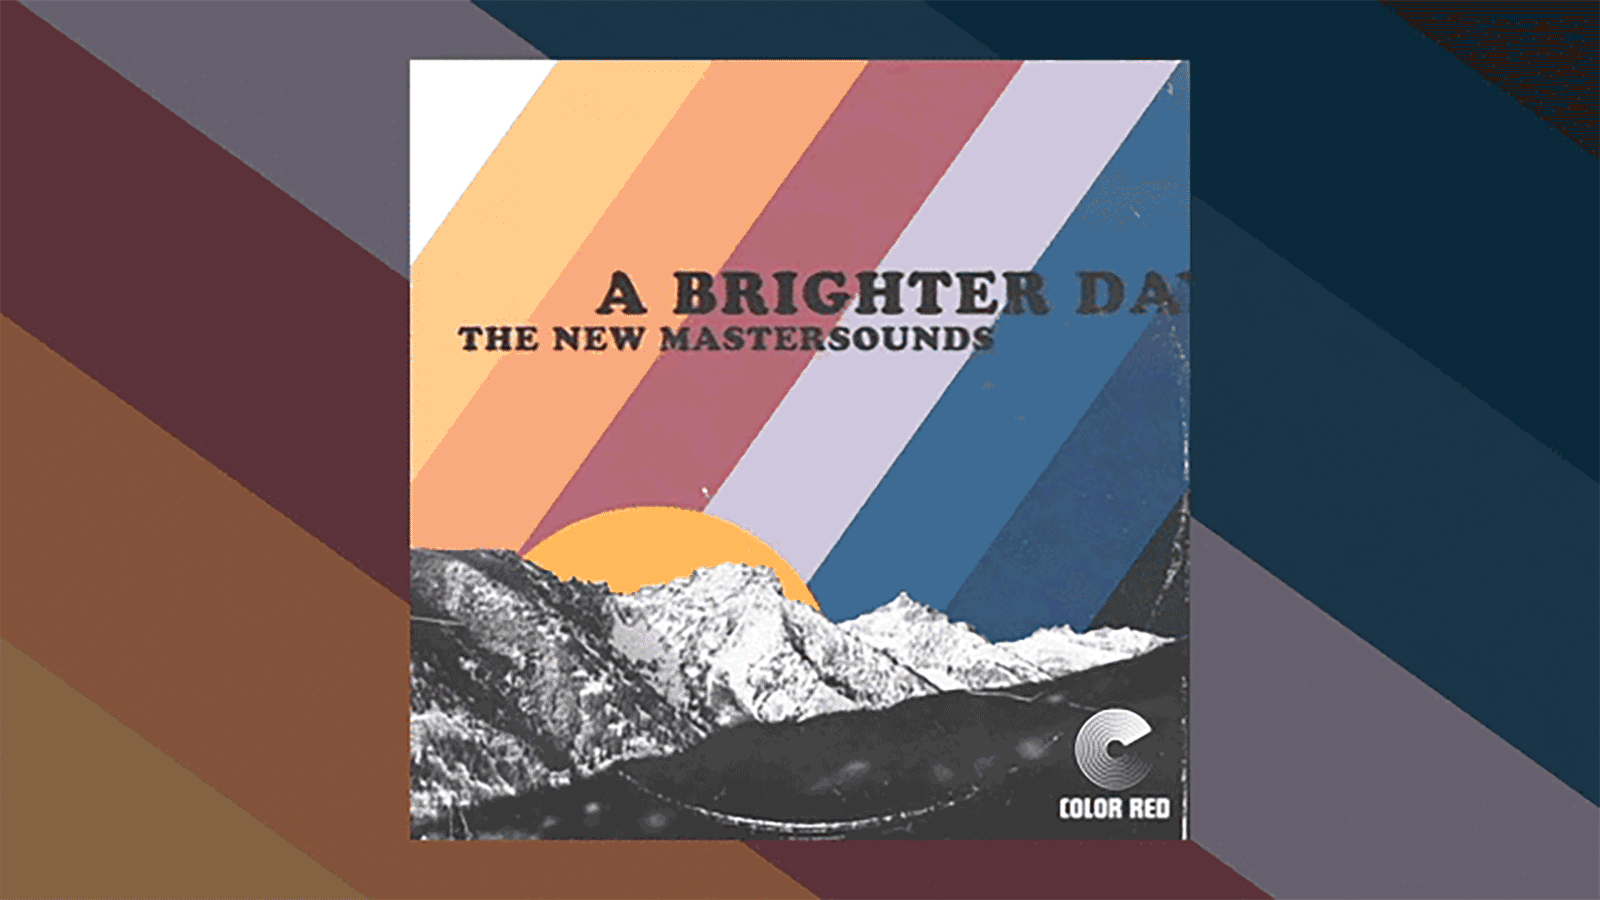 "A Brighter Day with Josh Hoyer" by The New Mastersounds